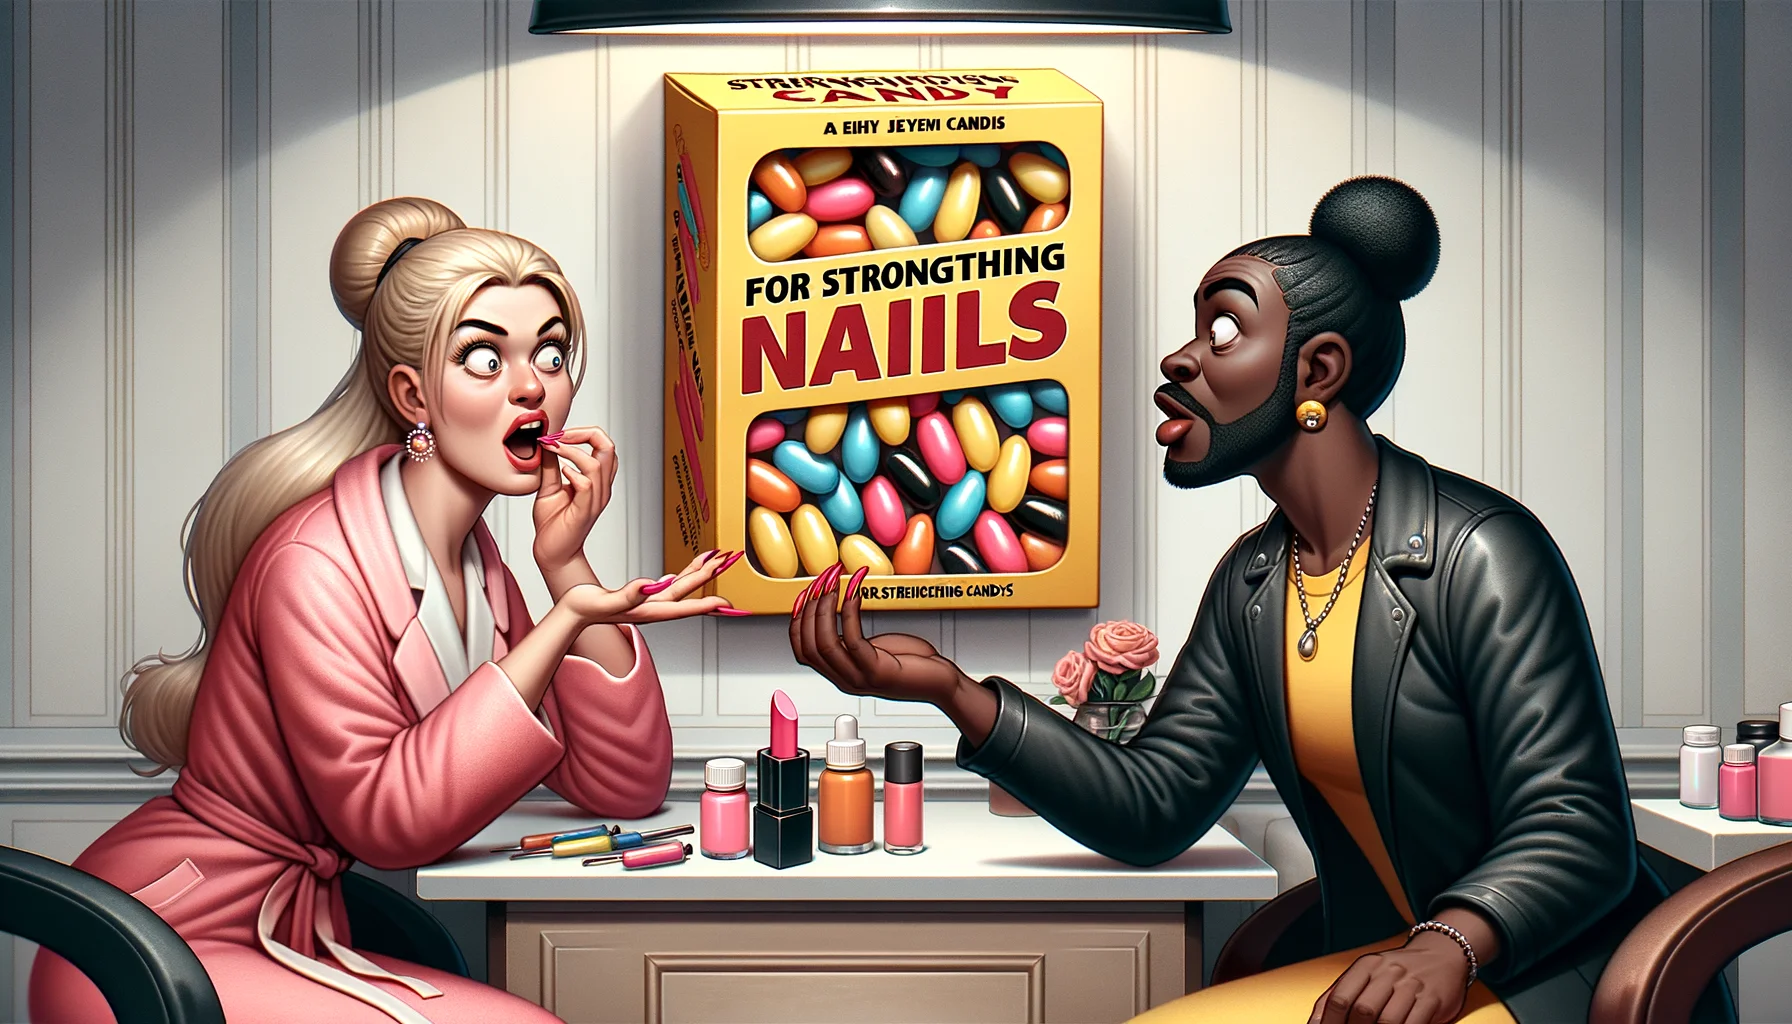 Illustrate a humorous, yet highly realistic scene at an upscale beauty salon. On the shelf prominently, there is a brightly colored, eye-catching box marked 'Candy for Strengthening Nails'. There are three people in the scene: an astonished Caucasian female manicurist, a curious South Asian male customer glancing at the box, and a Black female customer with an amused look, holding one of the candies between her fingers, gesturing as if she’s about to eat it.